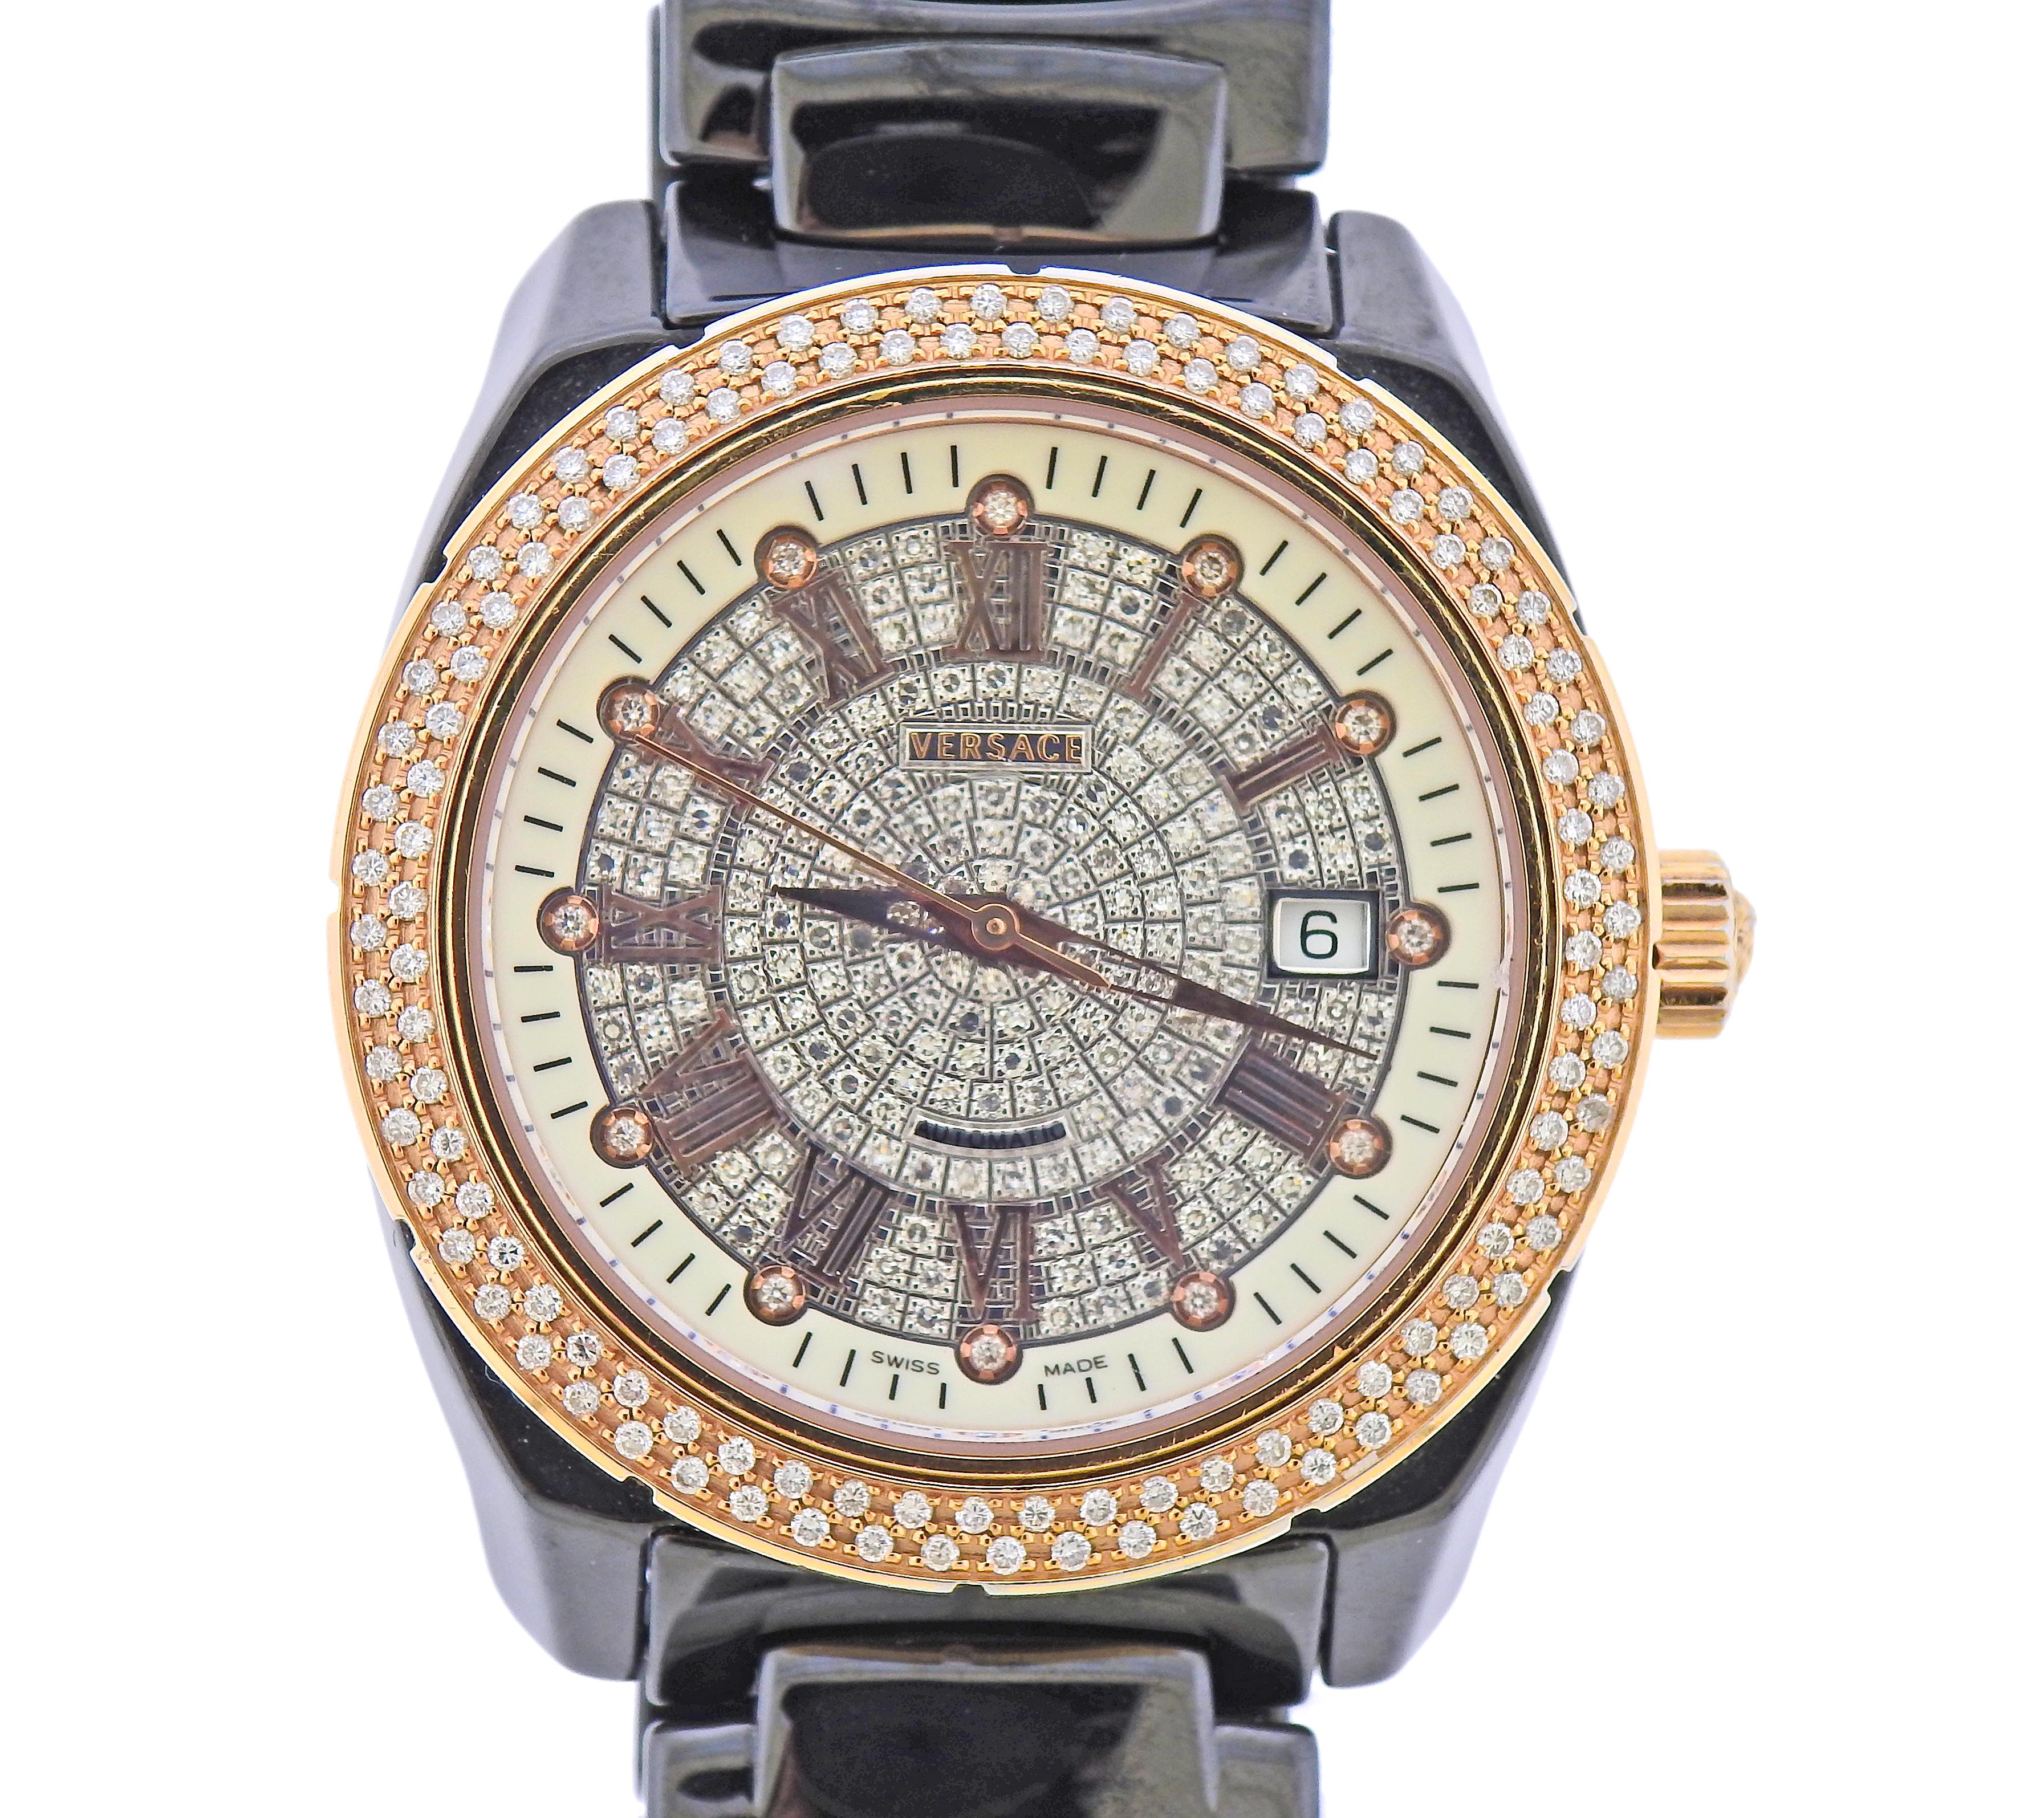 18k rose gold bezel and black ceramic band Versace watch, decorated with full diamond dial and bezel, date window at 3 o'clock, and Roman numerals. Automatic movement with skeleton back. Case is 40.5mm in diameter. Band will fit up to 7.5